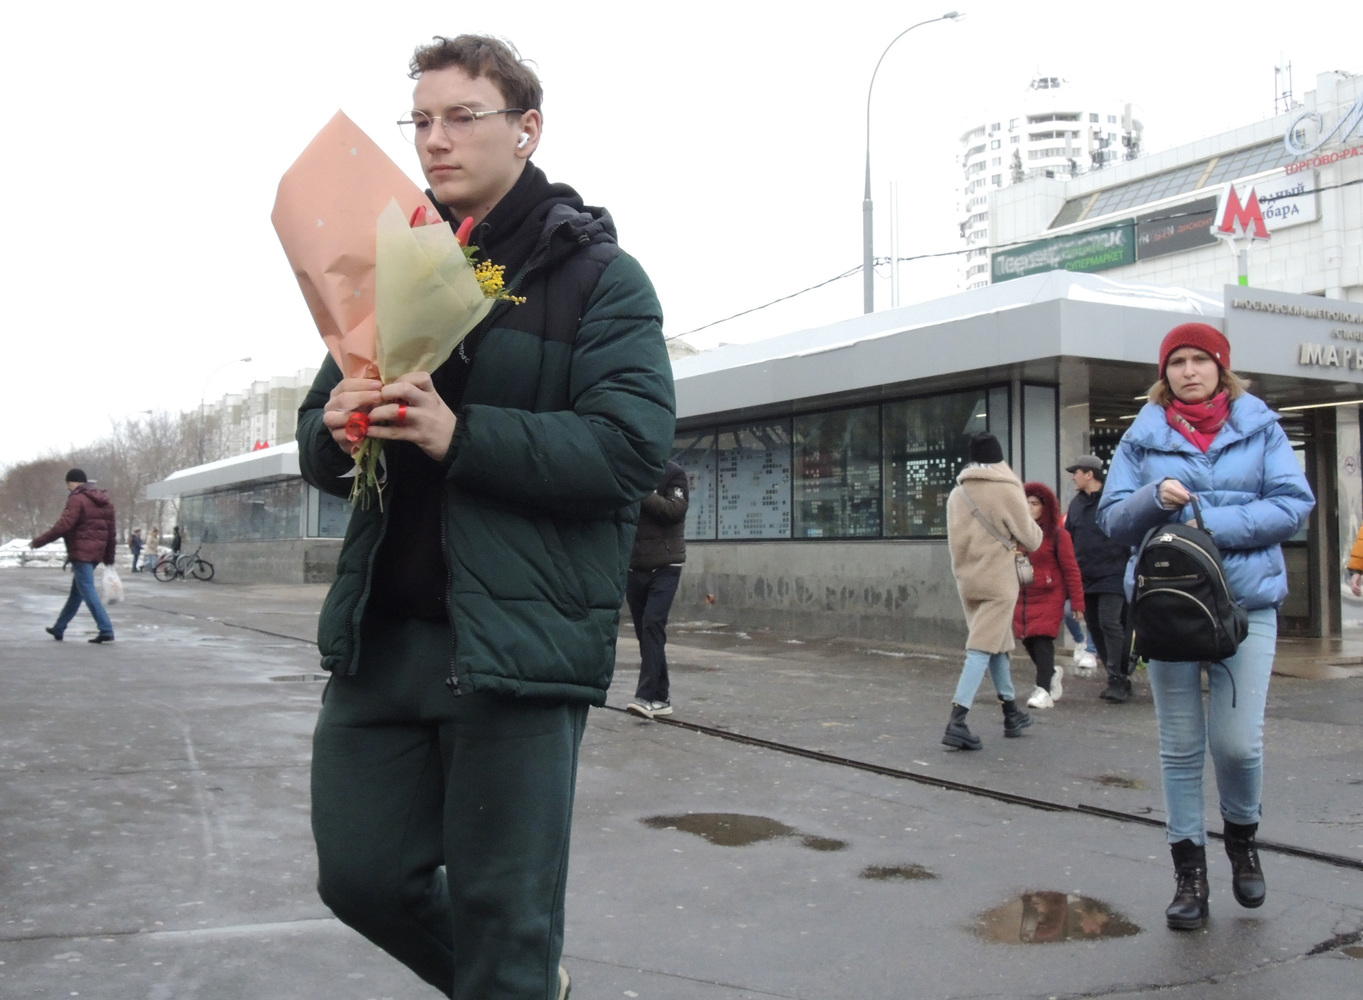 March 8 in Moscow: ladies with bouquets and submissive gentlemen